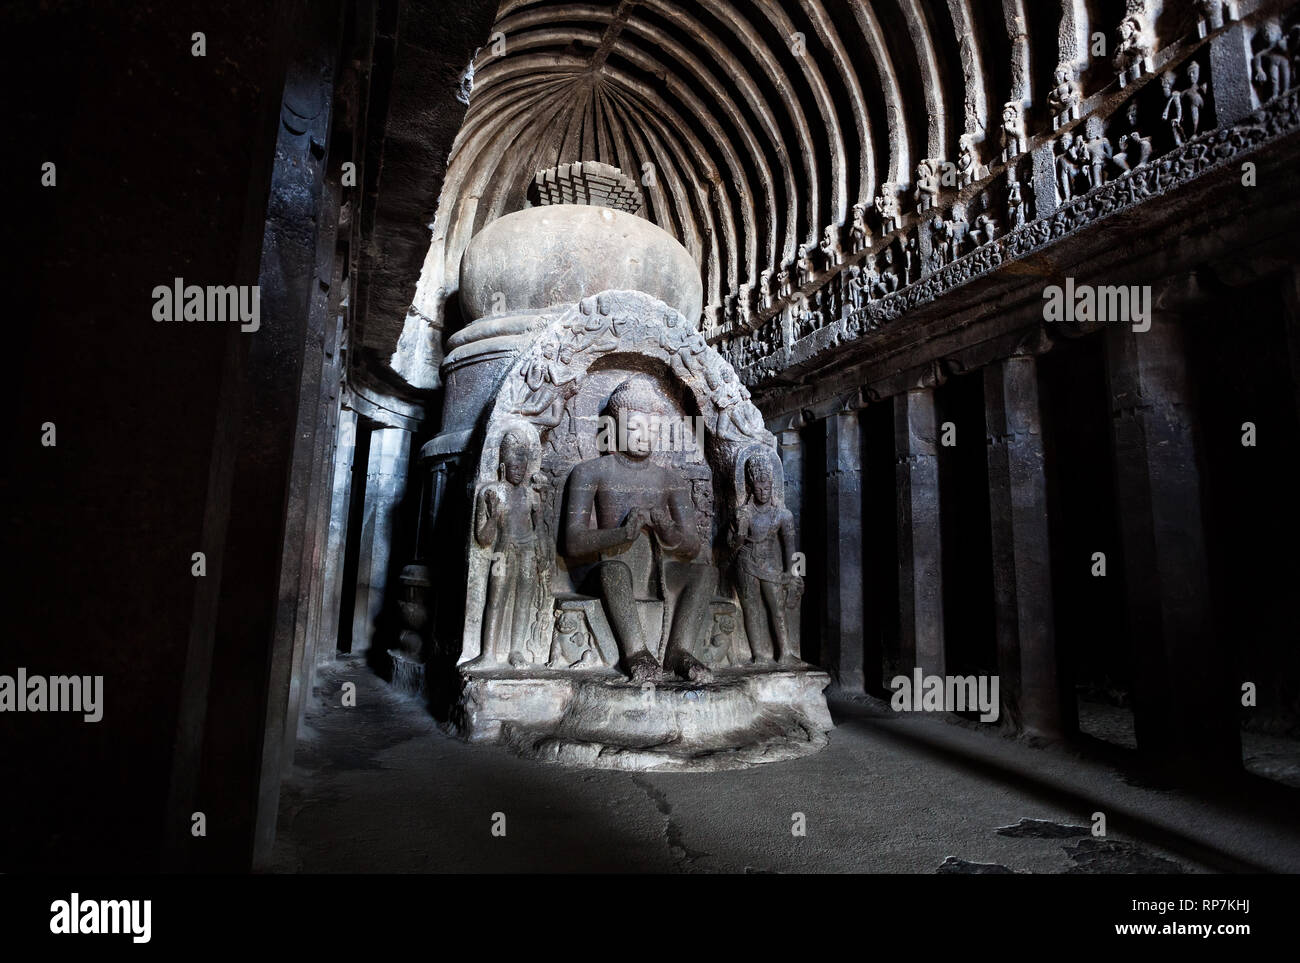 Carved statues of ancient Buddha in big hall with columns in Ellora cave near Aurangabad, Maharashtra, India Stock Photo